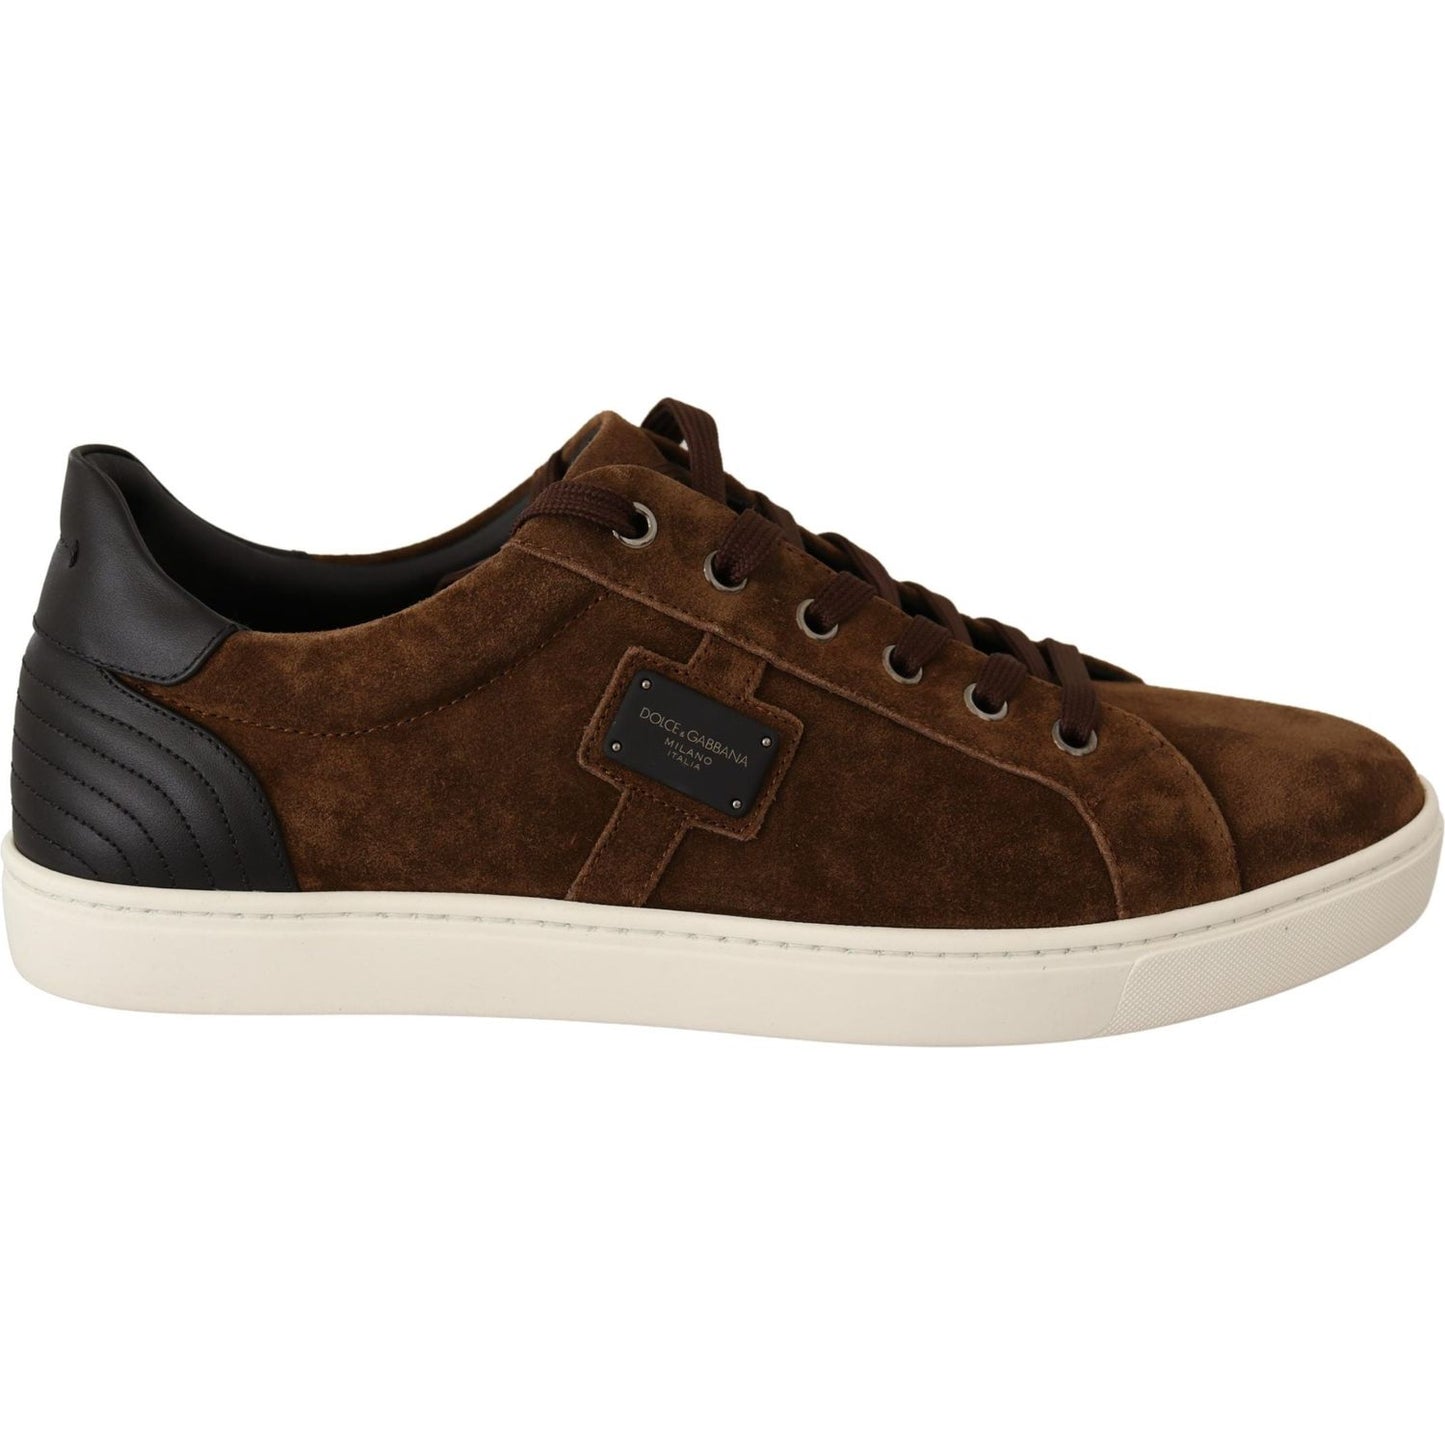 Dolce & Gabbana Elegant Leather Casual Sneakers in Brown brown-suede-leather-mens-low-tops-sneakers IMG_4823-scaled-c920a4f3-a78.jpg